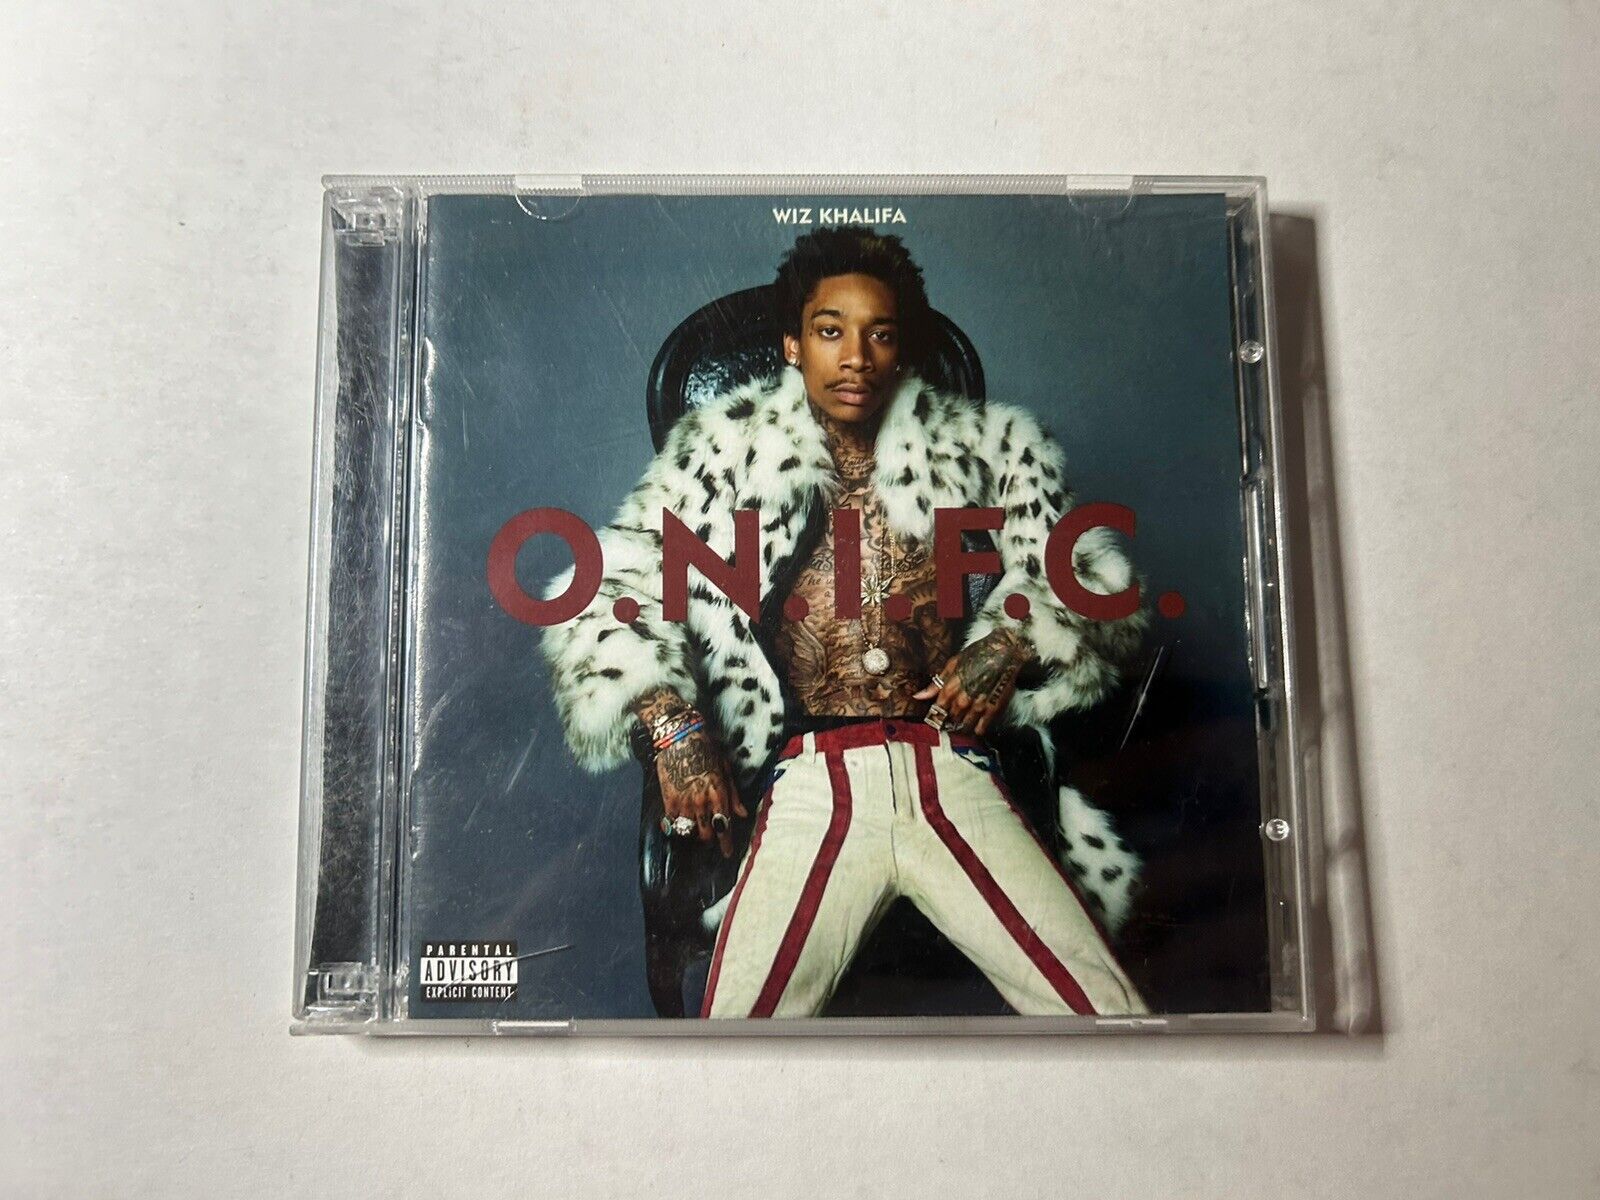 Wiz Khalifa O.N.I.F.C. 532392-2 Deluxe Edition Best Buy Exclusive Out Of Print